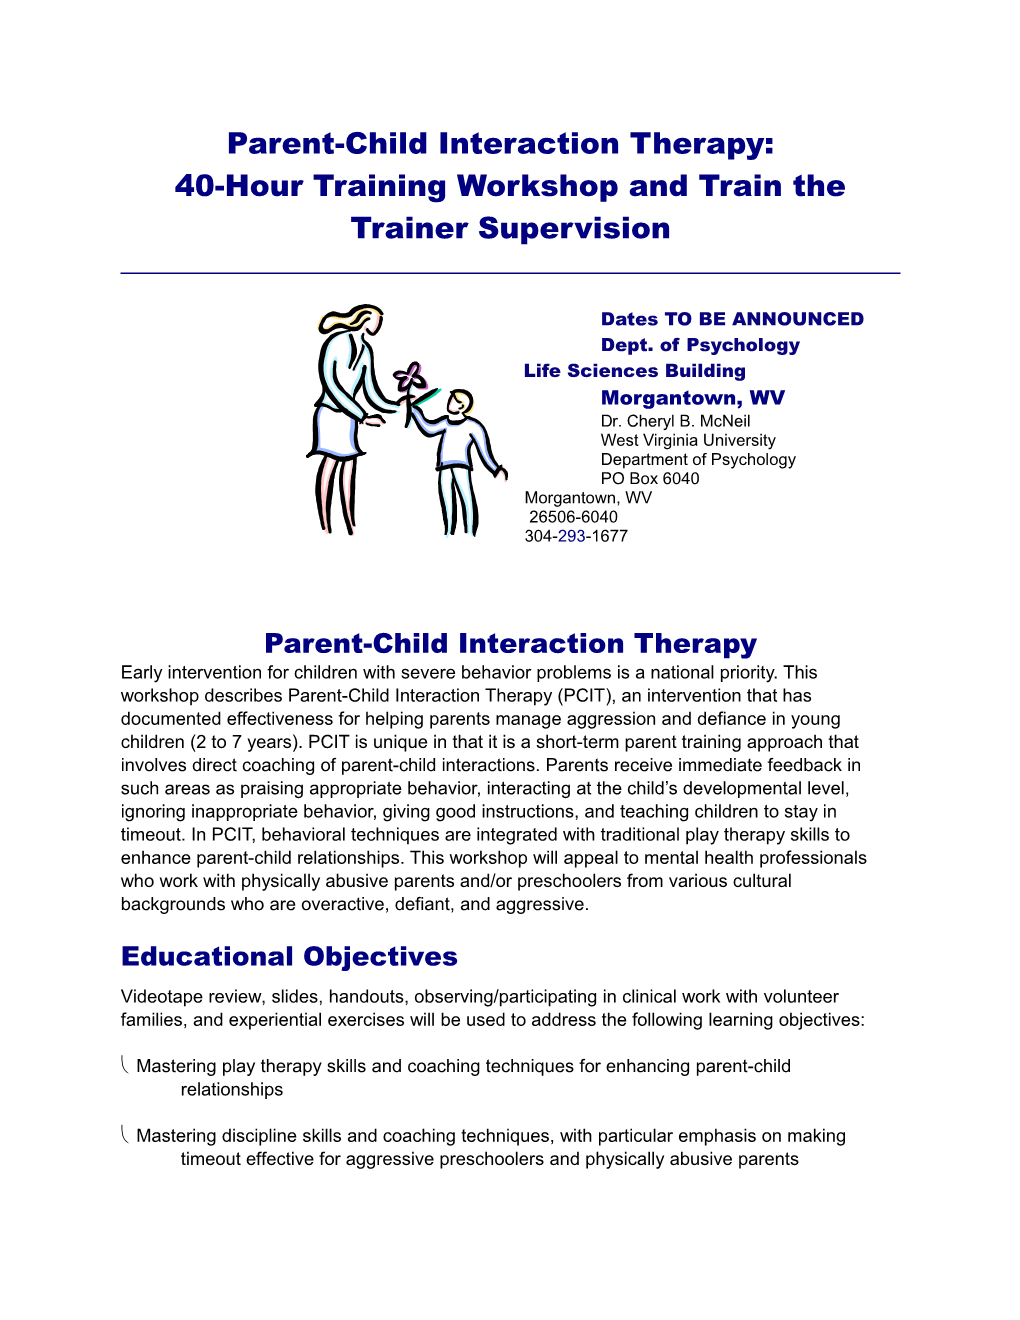 Parent-Child Interaction Therapy: